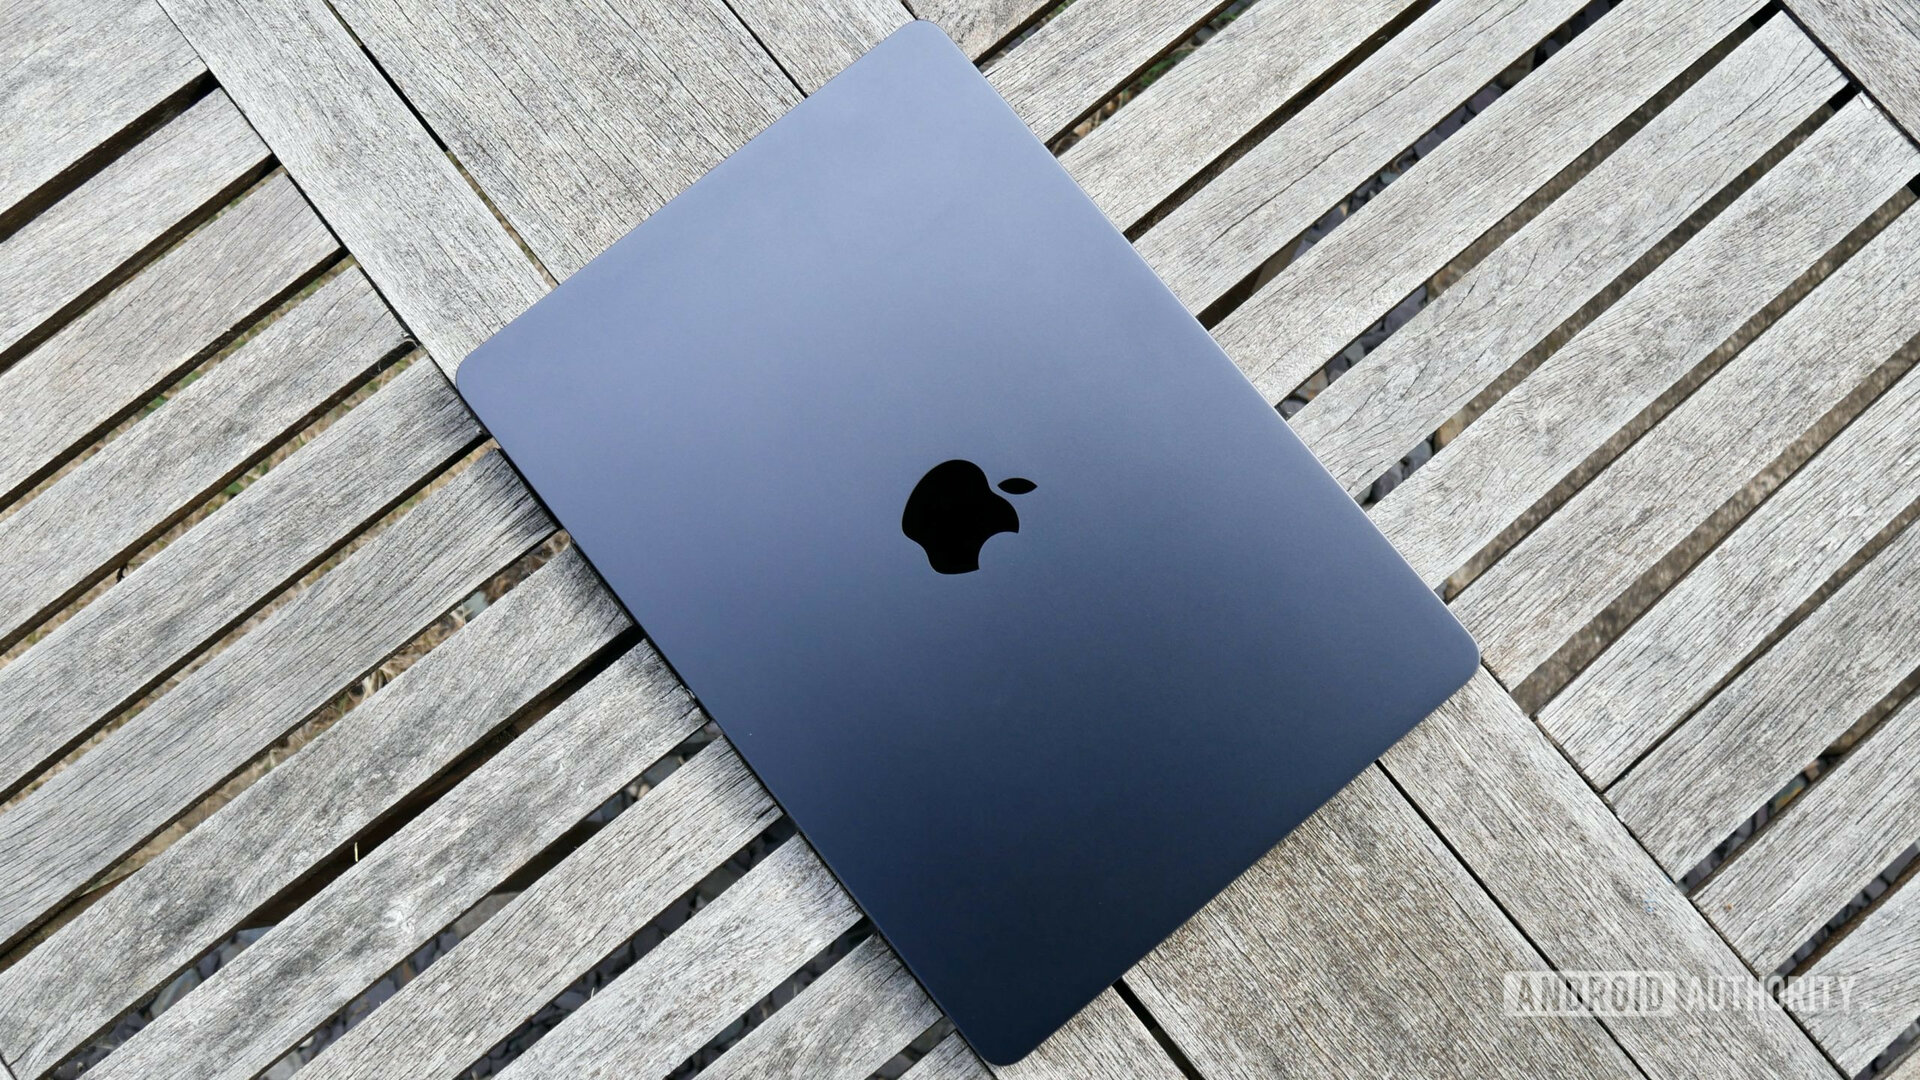 An Apple MacBook Air M2 closed shown lying on a wooden deck outdoors.